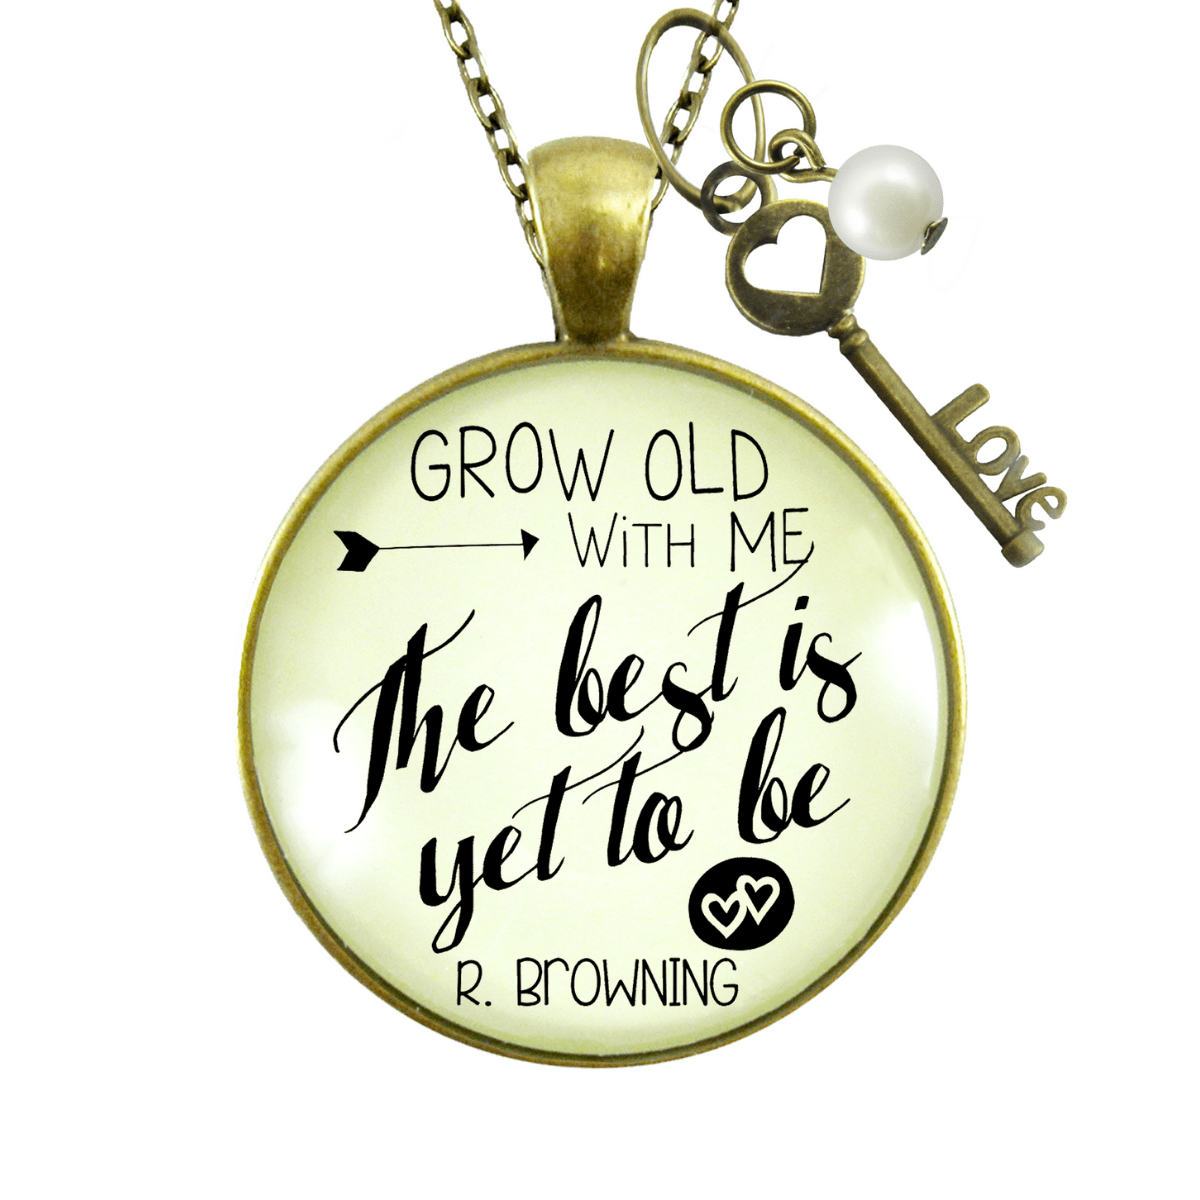 Couples Jewelry Grow Old with Me Necklace Best Yet to be Gift - Gutsy Goodness